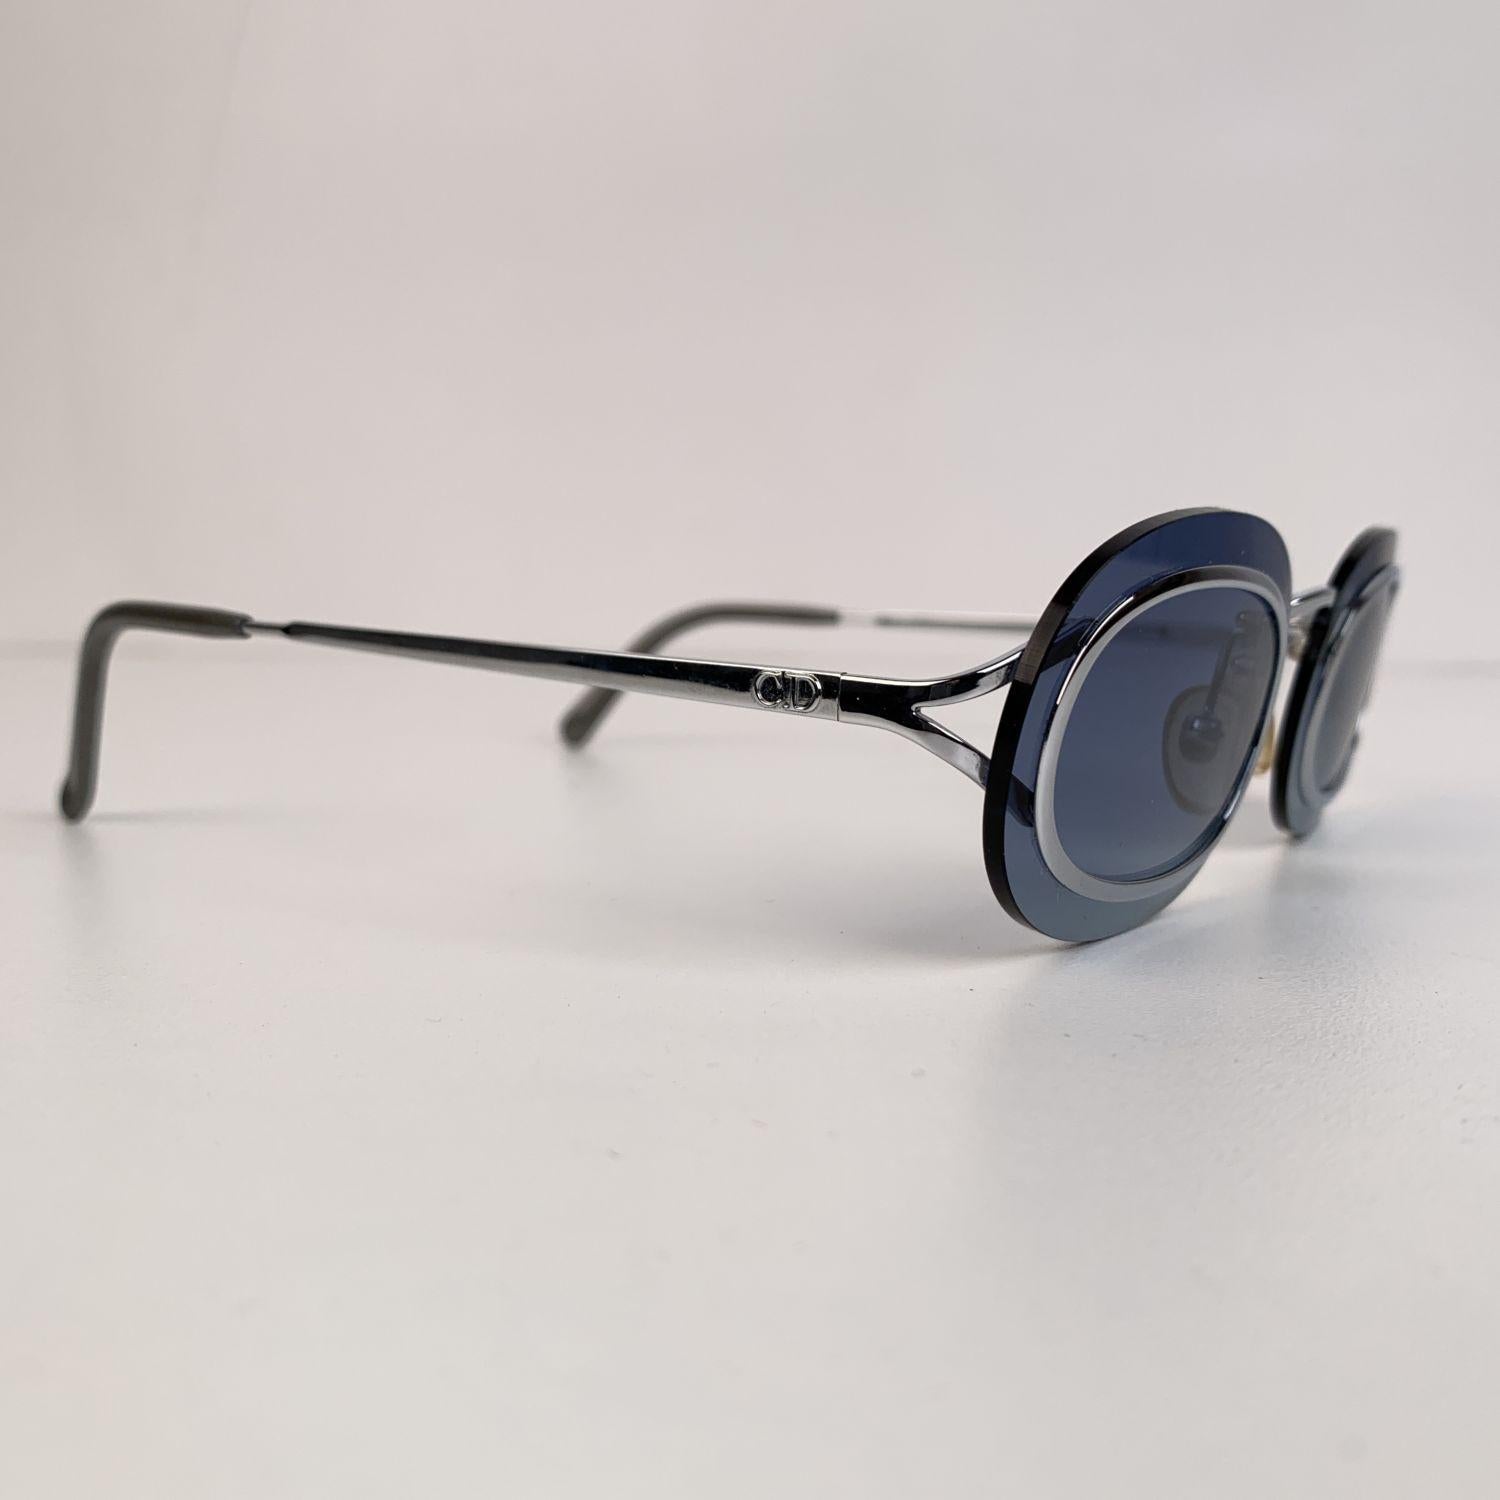 Vintage Christian Dior mod. 2970 Oval Sunglasses from the 90s. Rimless design with silver metal detailing. Light blue lenses. CD logo on temples.Made in Austria. Style & refs: 2370 - 53/16 - 135

Details

MATERIAL: Metal

COLOR: Blue

MODEL: